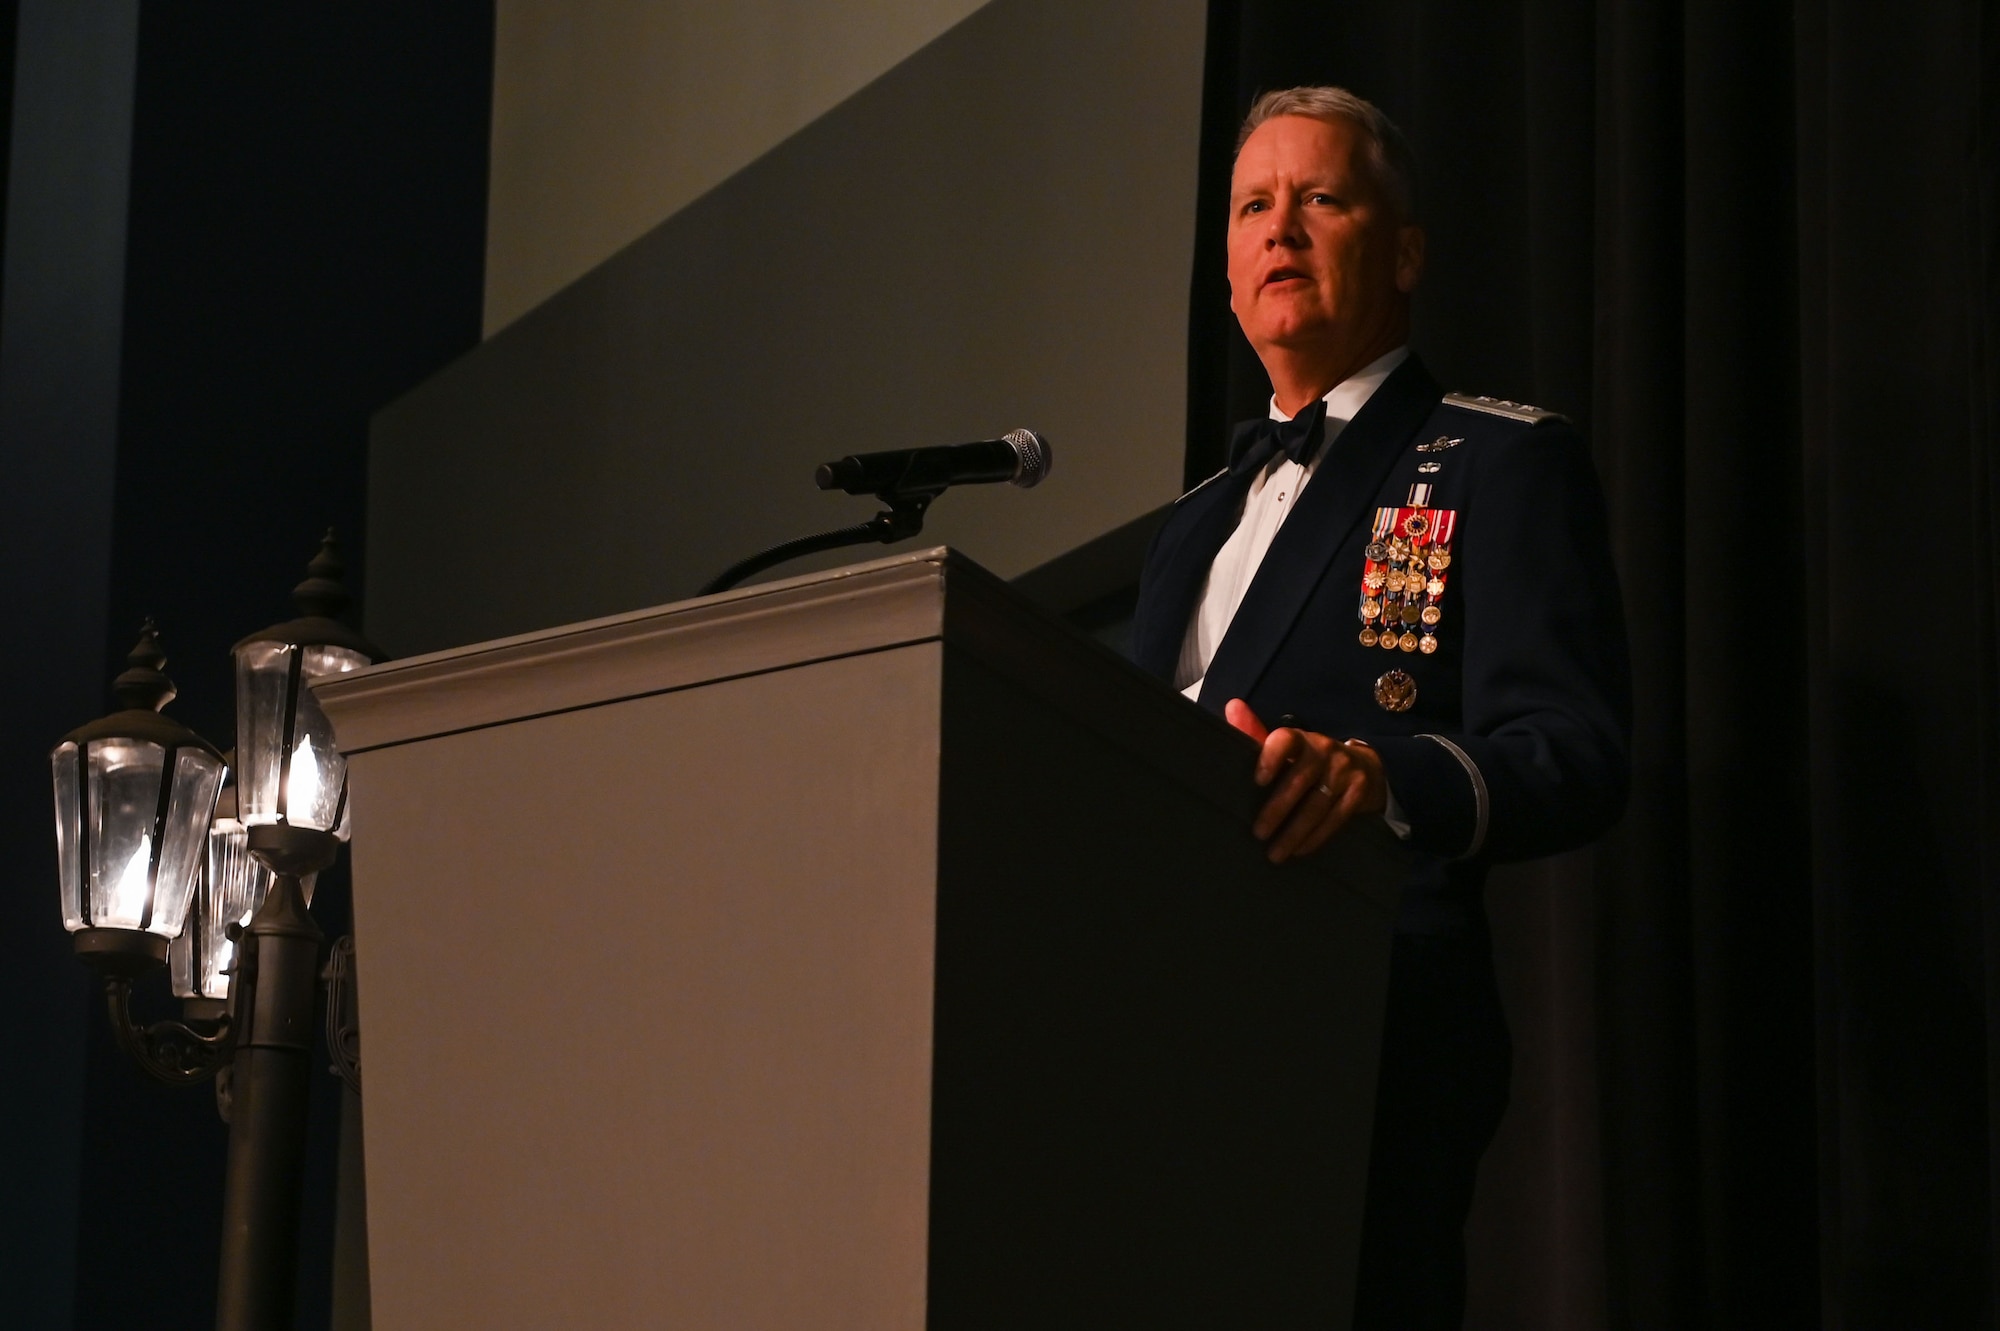 Lt. Gen. James Jacobson, Pacific Air Forces deputy commander, speaks in front of attendees at Fairchild’s 75th Anniversary Air Force Ball at the Spokane Convention Center, Spokane, Washington, Sept. 24, 2022. Jacobson has recorded more than 4,100 total flying hours and flown combat missions for operations Desert Shield, Allied Forces and Enduring Freedom. (U.S. Air Force photo by Airman 1st Class Morgan Dailey)